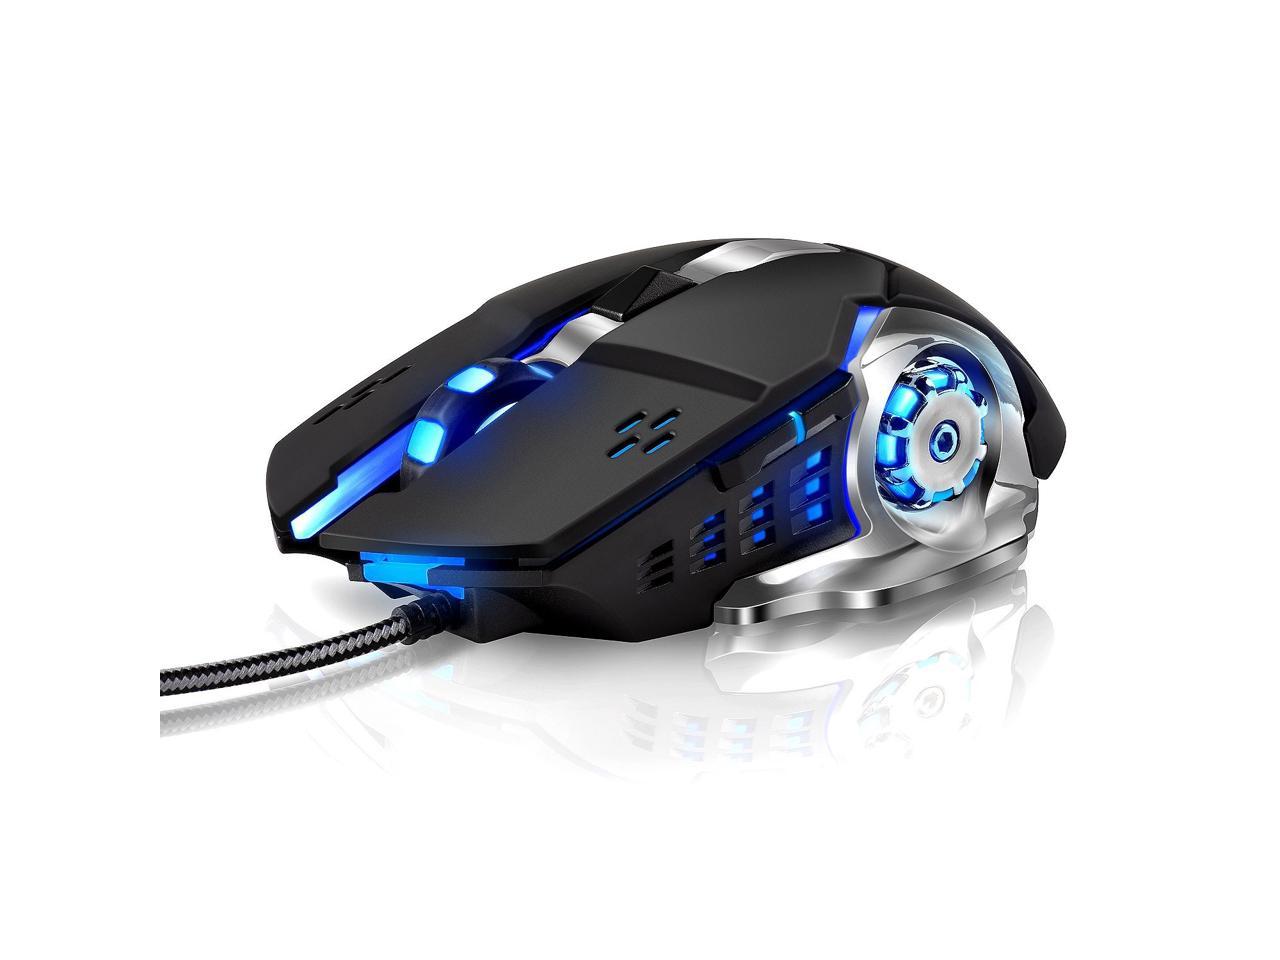 PrinceShop Original Combaterwing W50 Wired Game Mouse deesktop laptop game mouse 7 Button With Weight 4 Colors Breathing Led Light